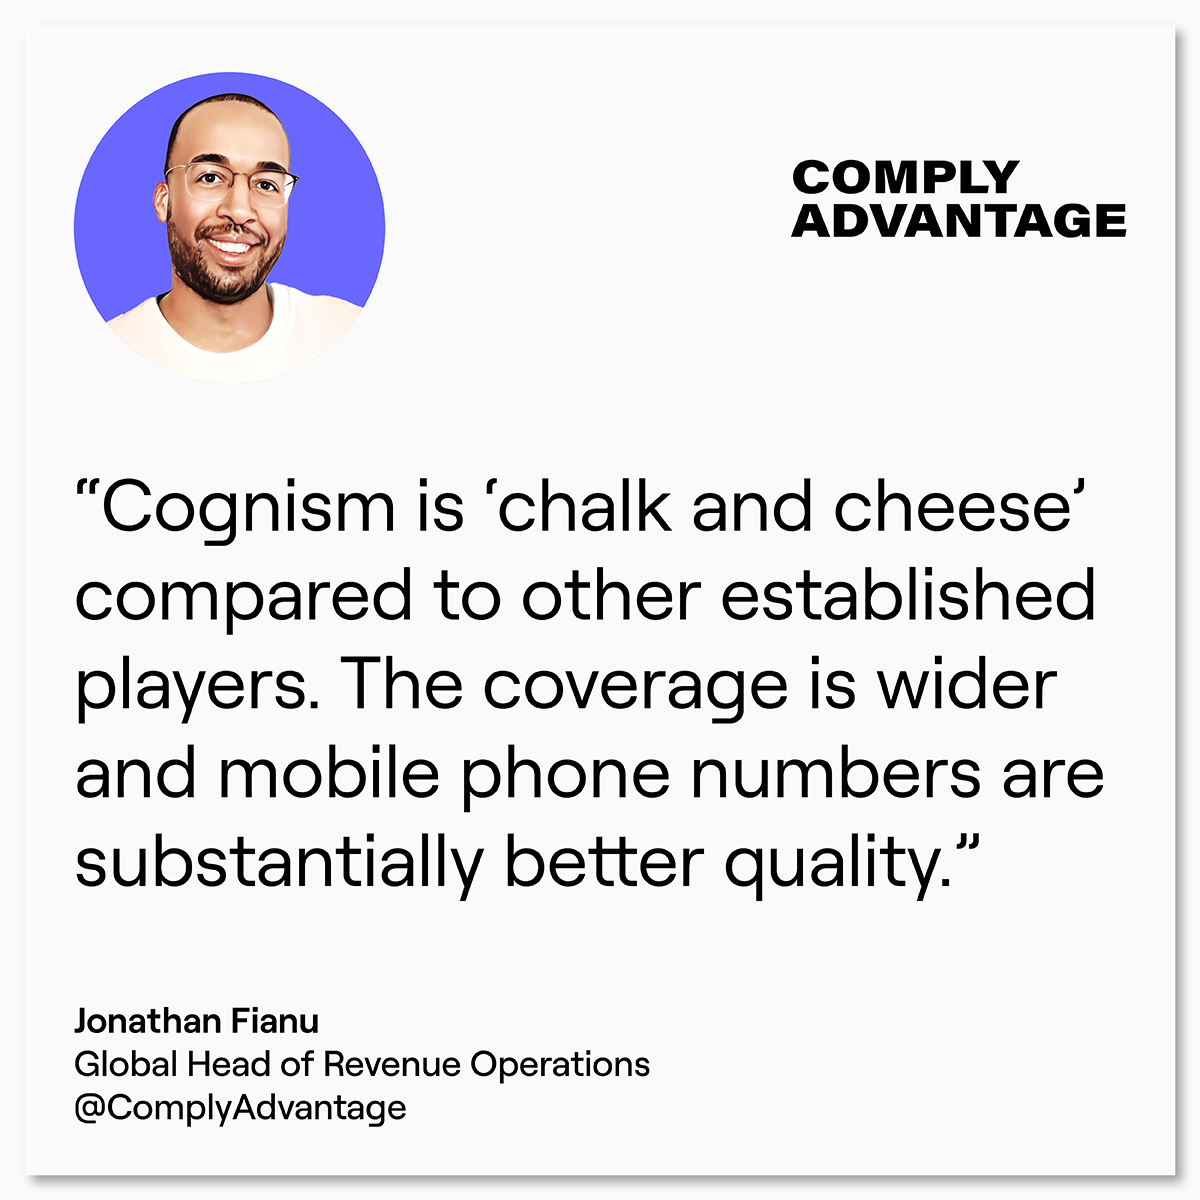 Comply Advantage customer review for Cognism